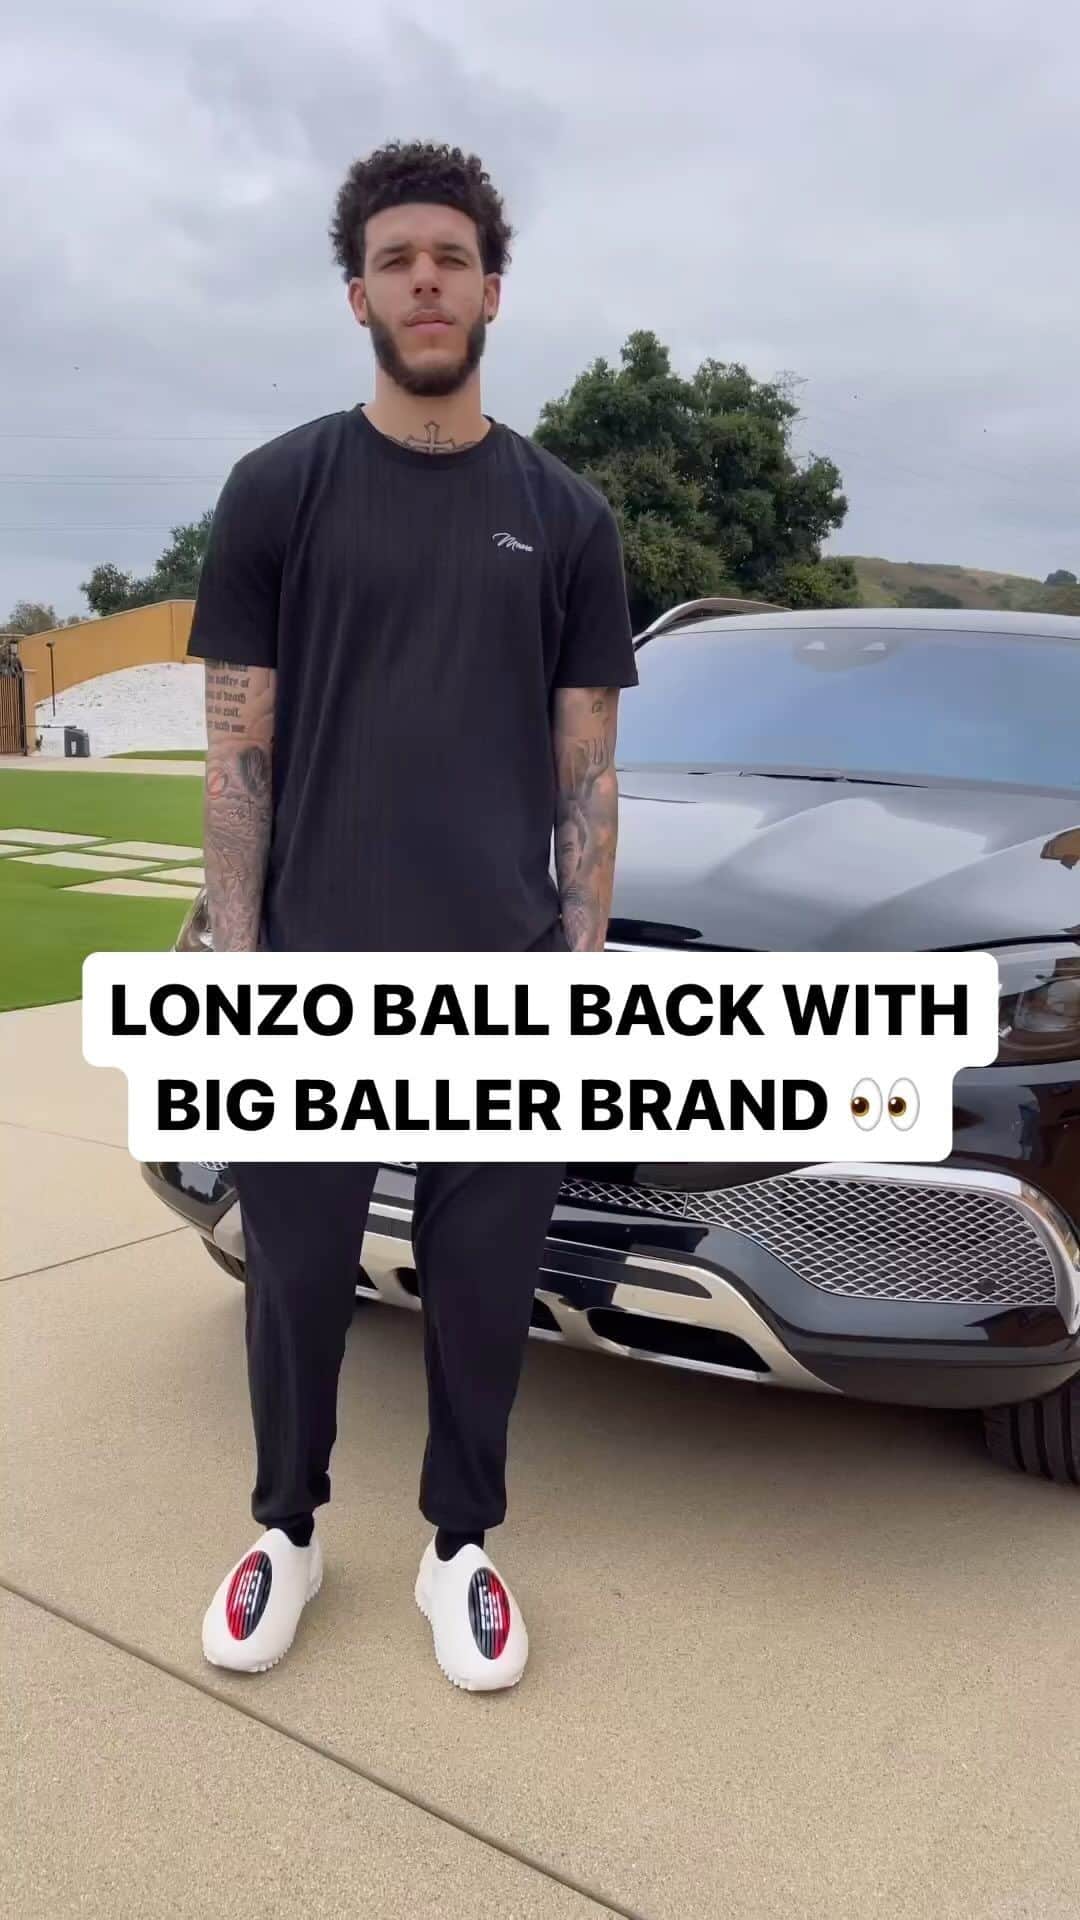 Nice Kicksのインスタグラム：「Lonzo in the new Big Baller Brand slippers fresh out of knee surgery 👀  Follow @nicekicks for more #sneakers content! 🔥👟」